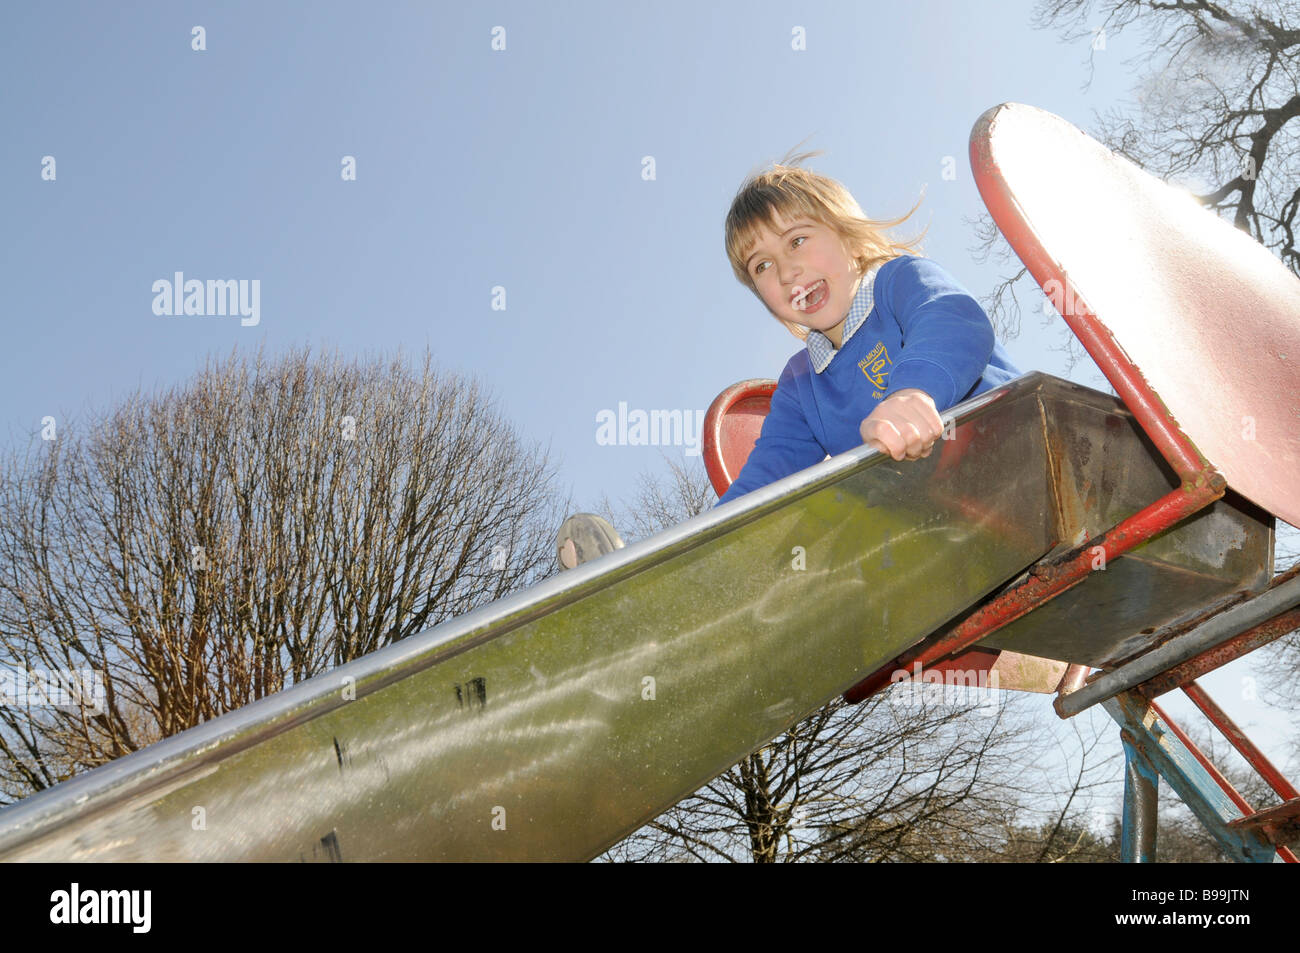 A six year old girl in her school uniform on a playground slide Stock Photo